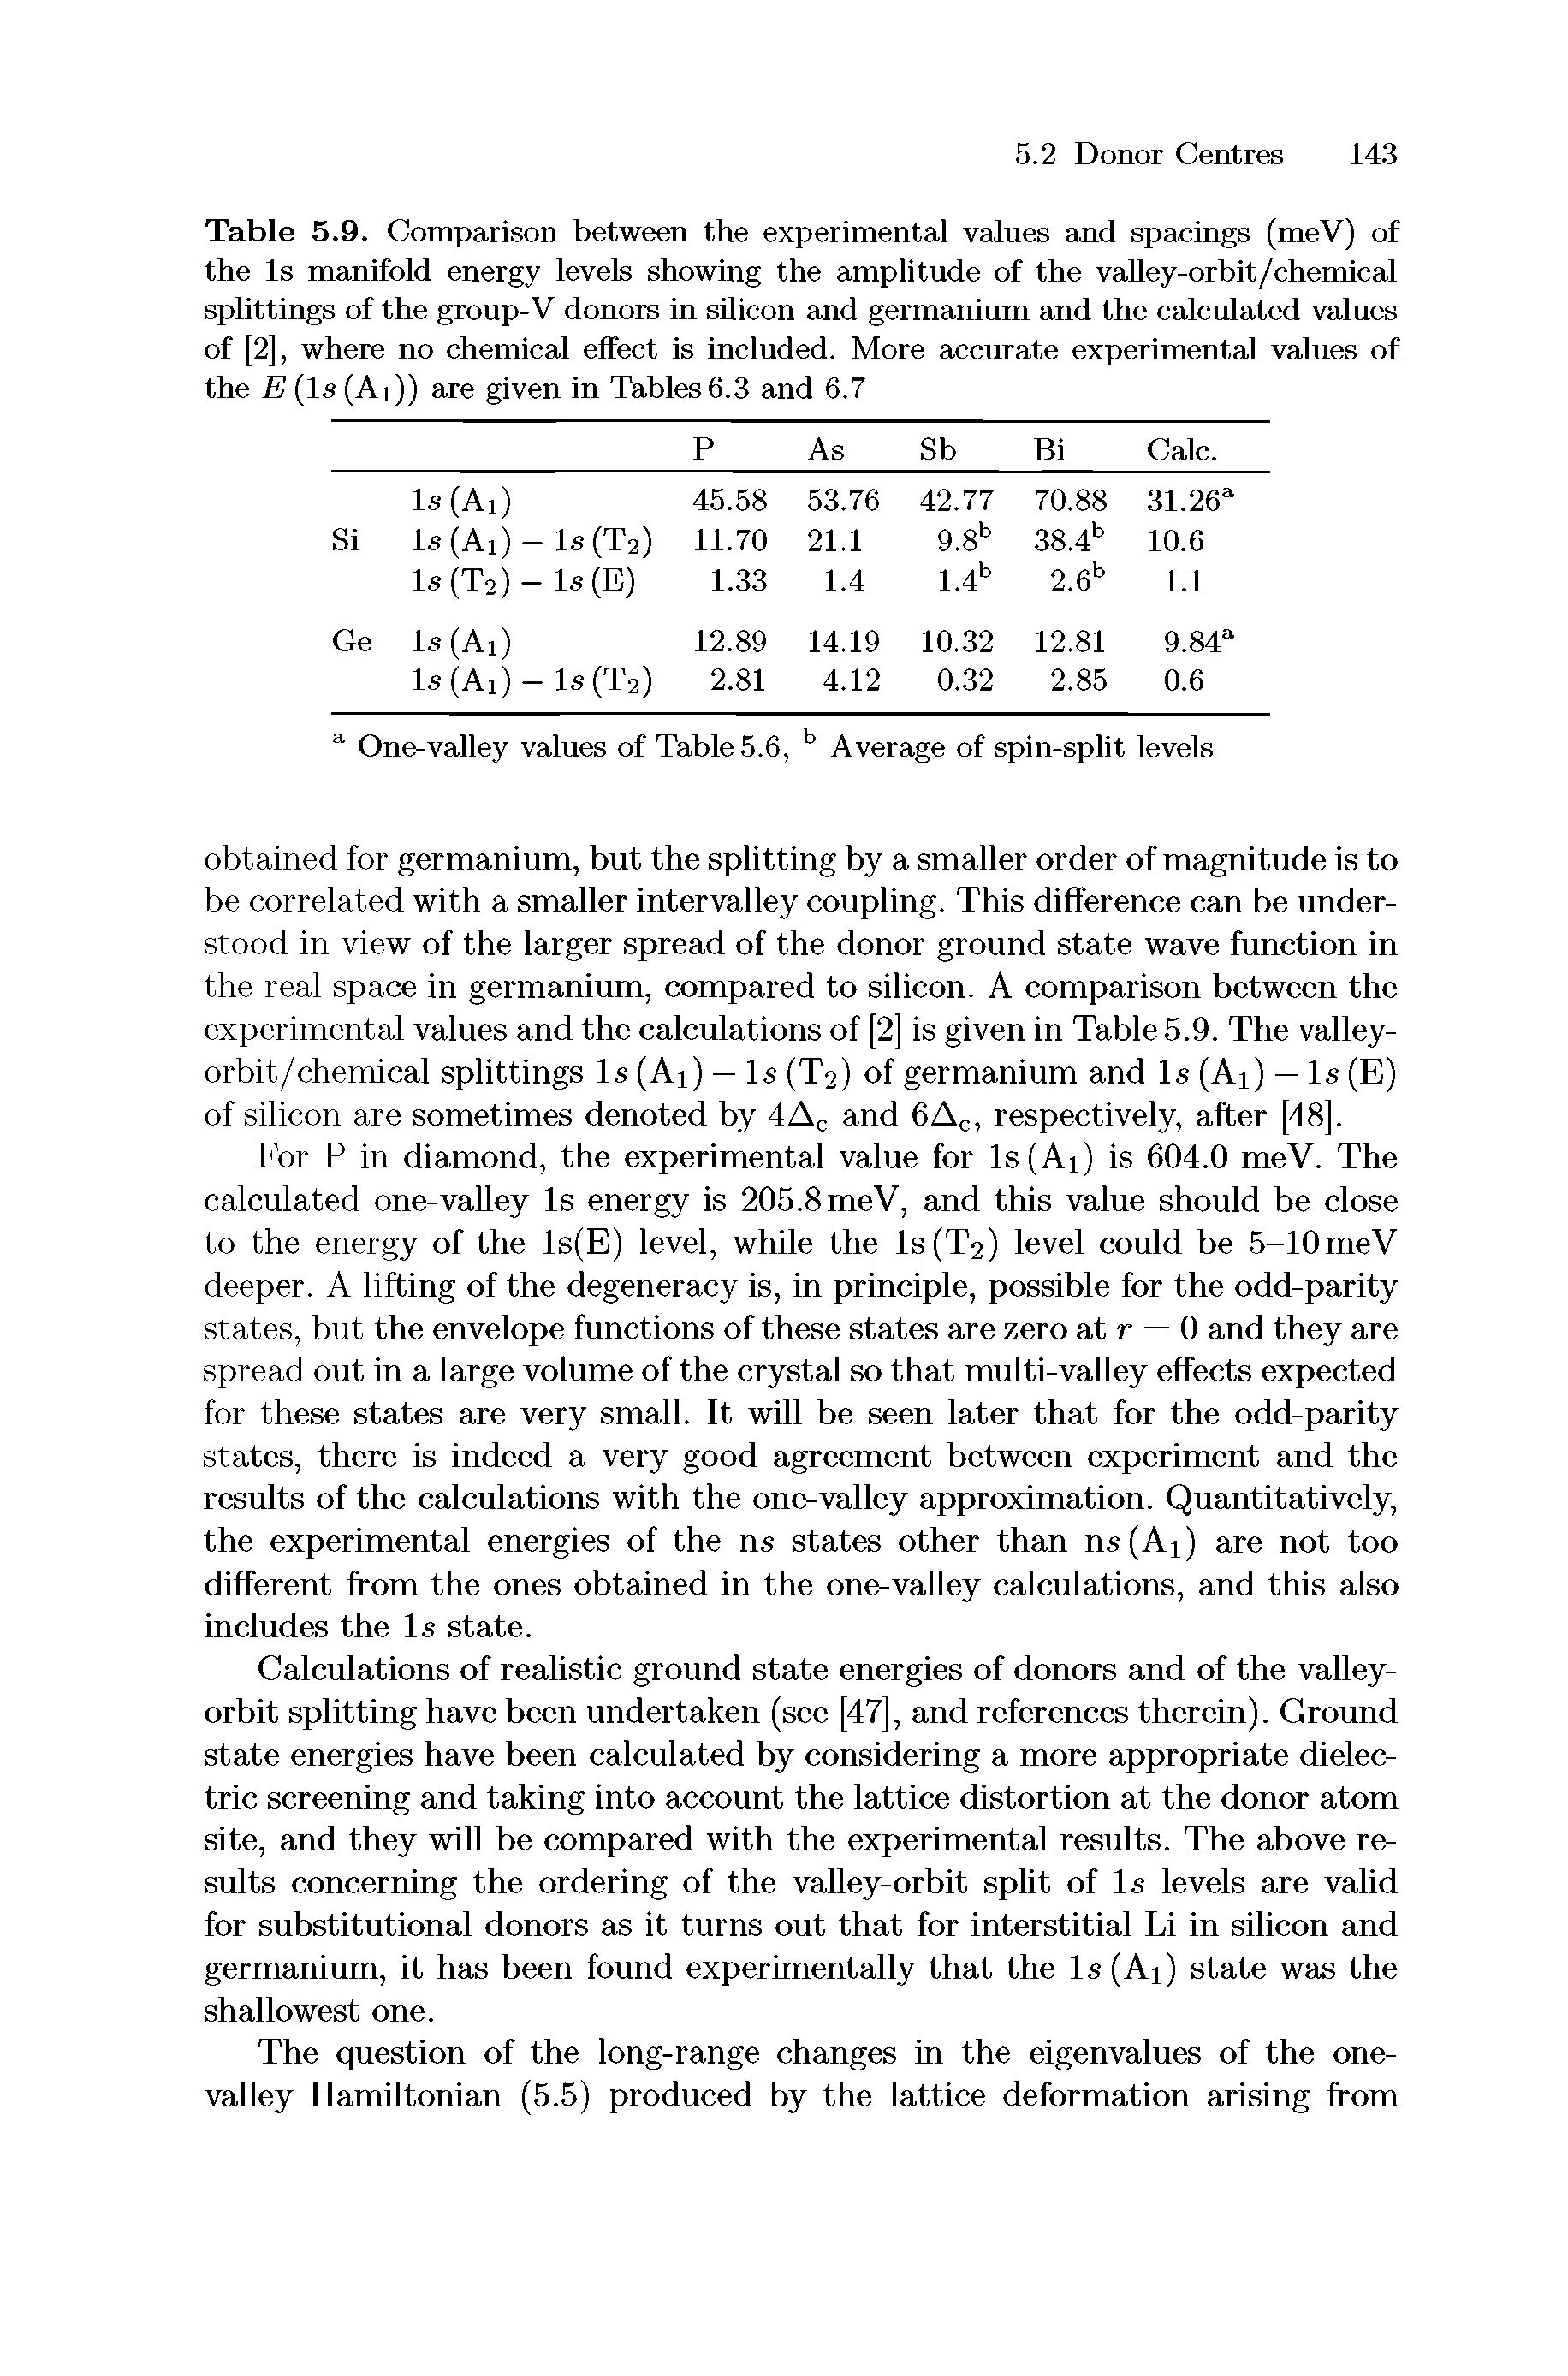 Table 5.9. Comparison between the experimental values and spacings (meV) of the Is manifold energy levels showing the amplitude of the valley-orbit/chemical splittings of the group-V donors in silicon and germanium and the calculated values of [2], where no chemical effect is included. More accurate experimental values of the E (Is (Ai)) are given in Tables 6.3 and 6.7...